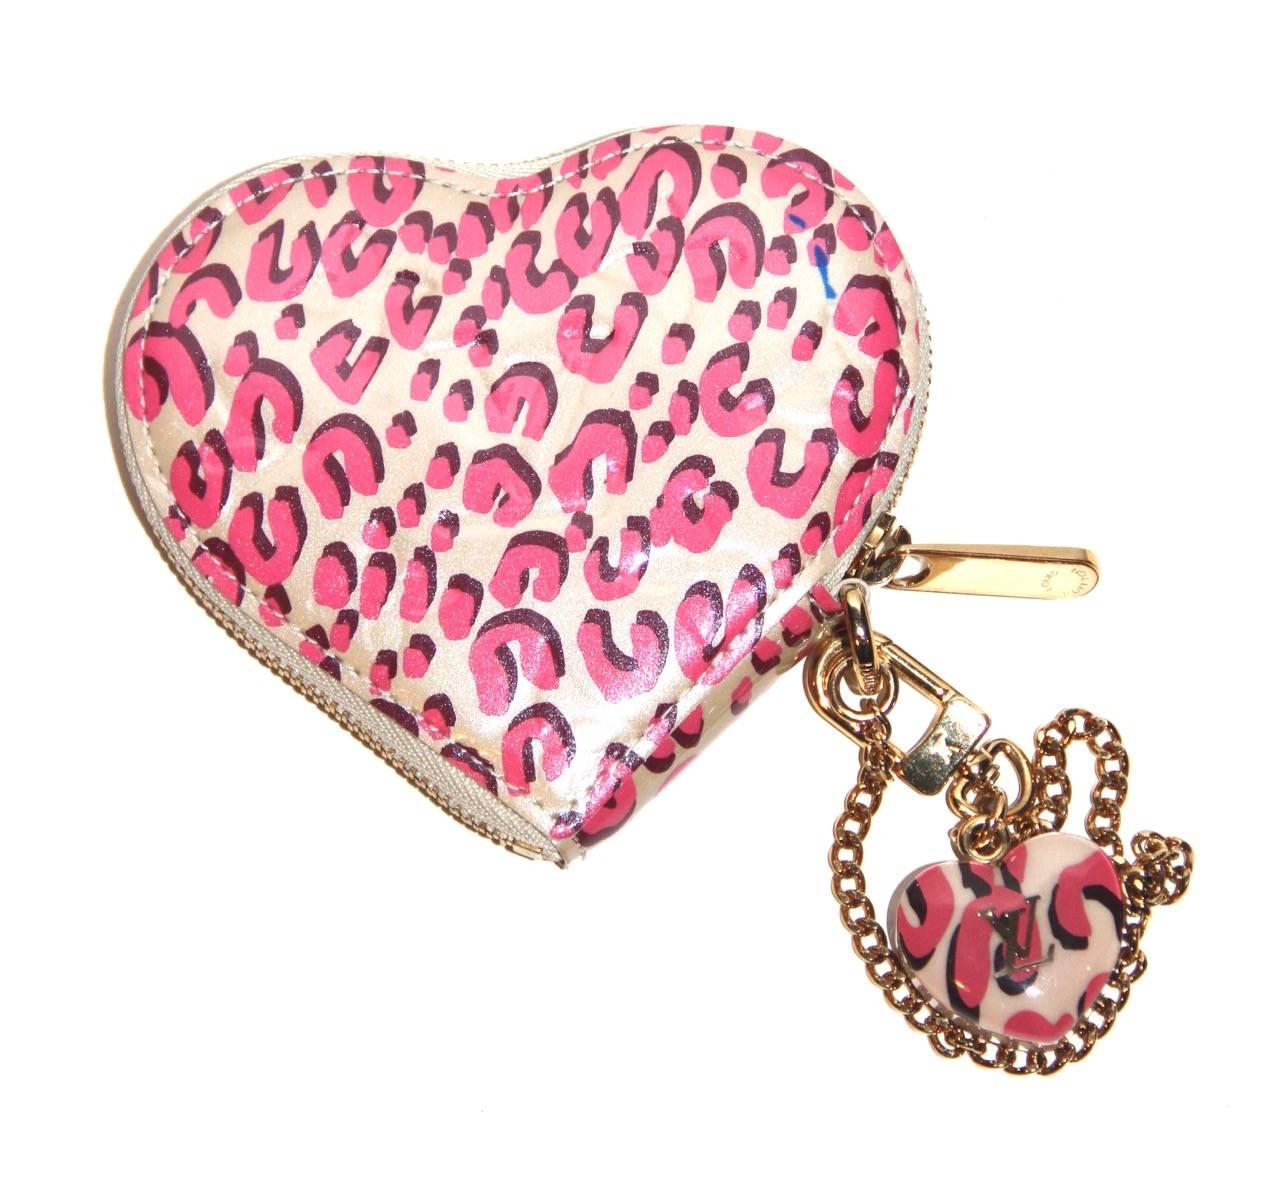 Ultra-chic and stylish heart coin purse from the Stephen Sprouse Collection for Louis Vuitton. 

Louis Vuitton monogram embossed leopard print in pink and white patent leather. It features a gold-tone hardware, a top brass zip fastening, a brass